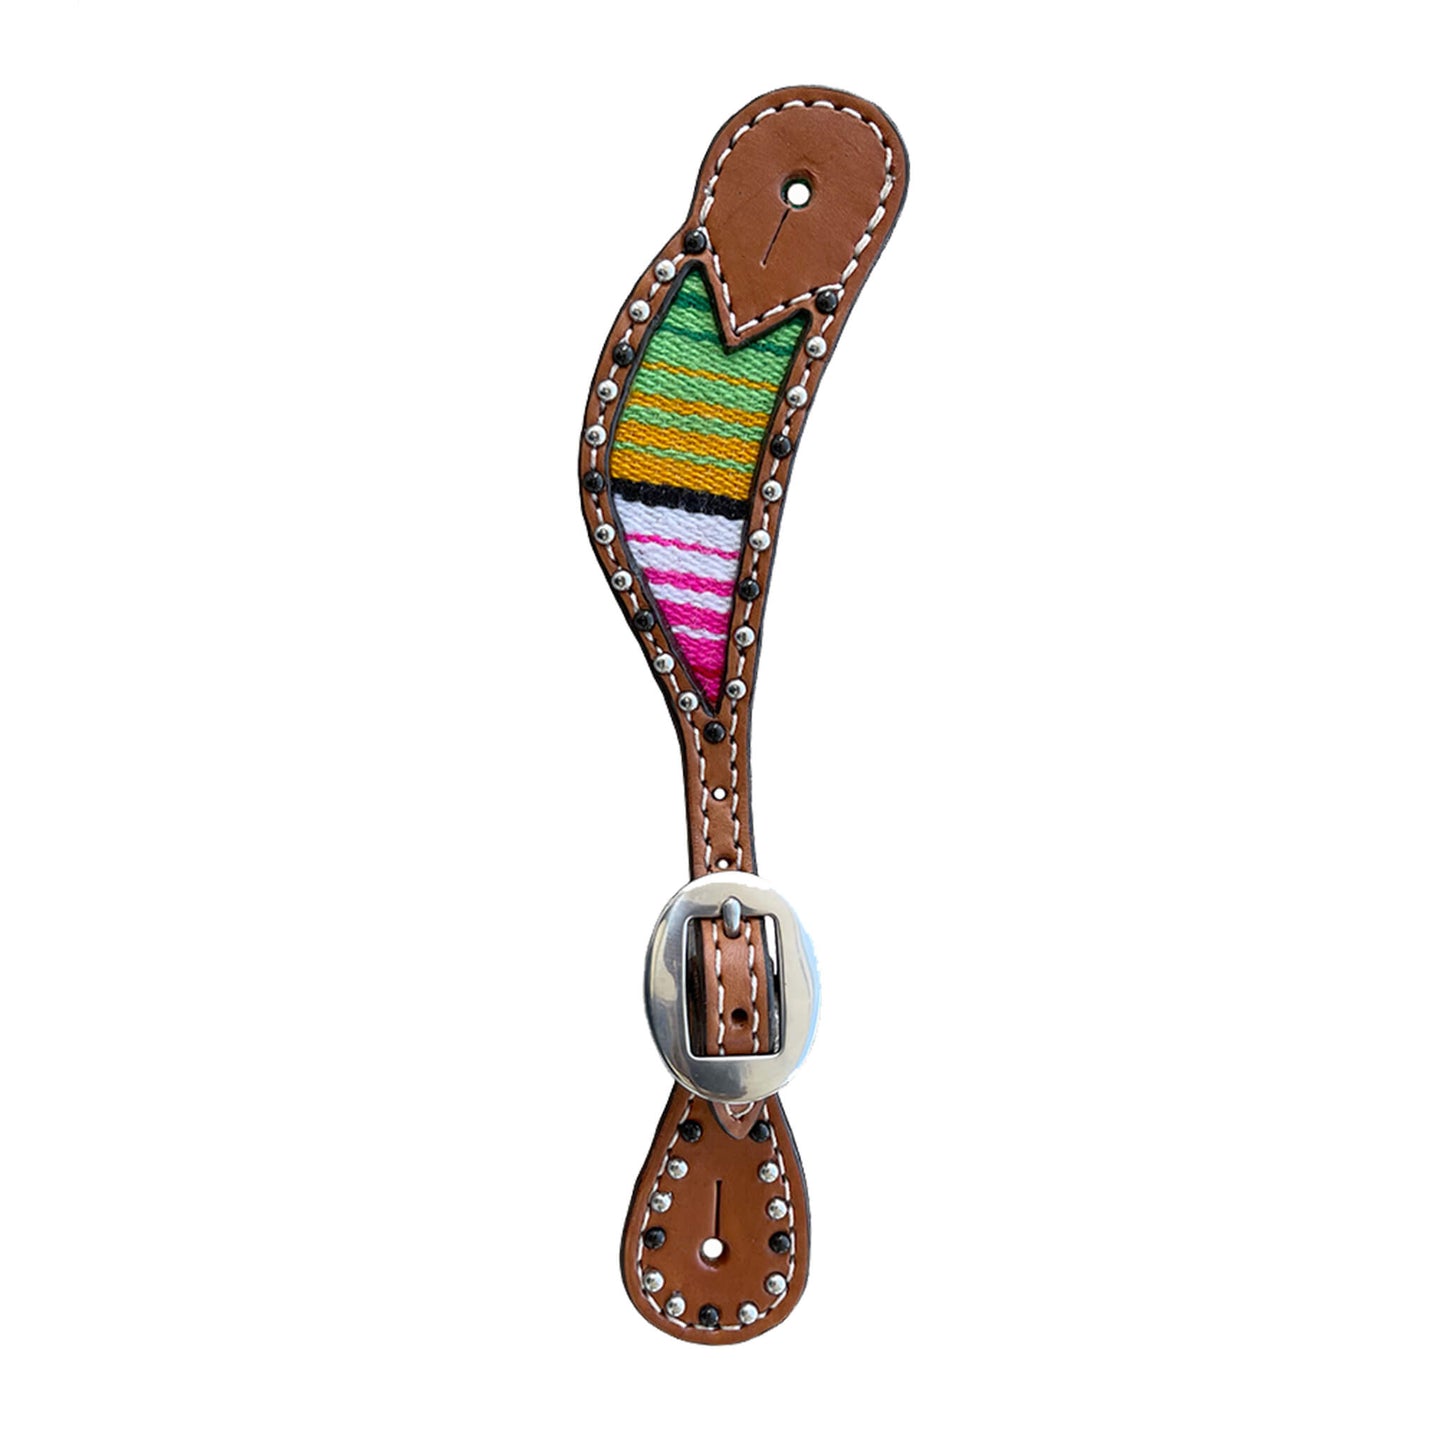 Ladies spur straps golden leather serape inlay with black and SS spots (serape color may vary).